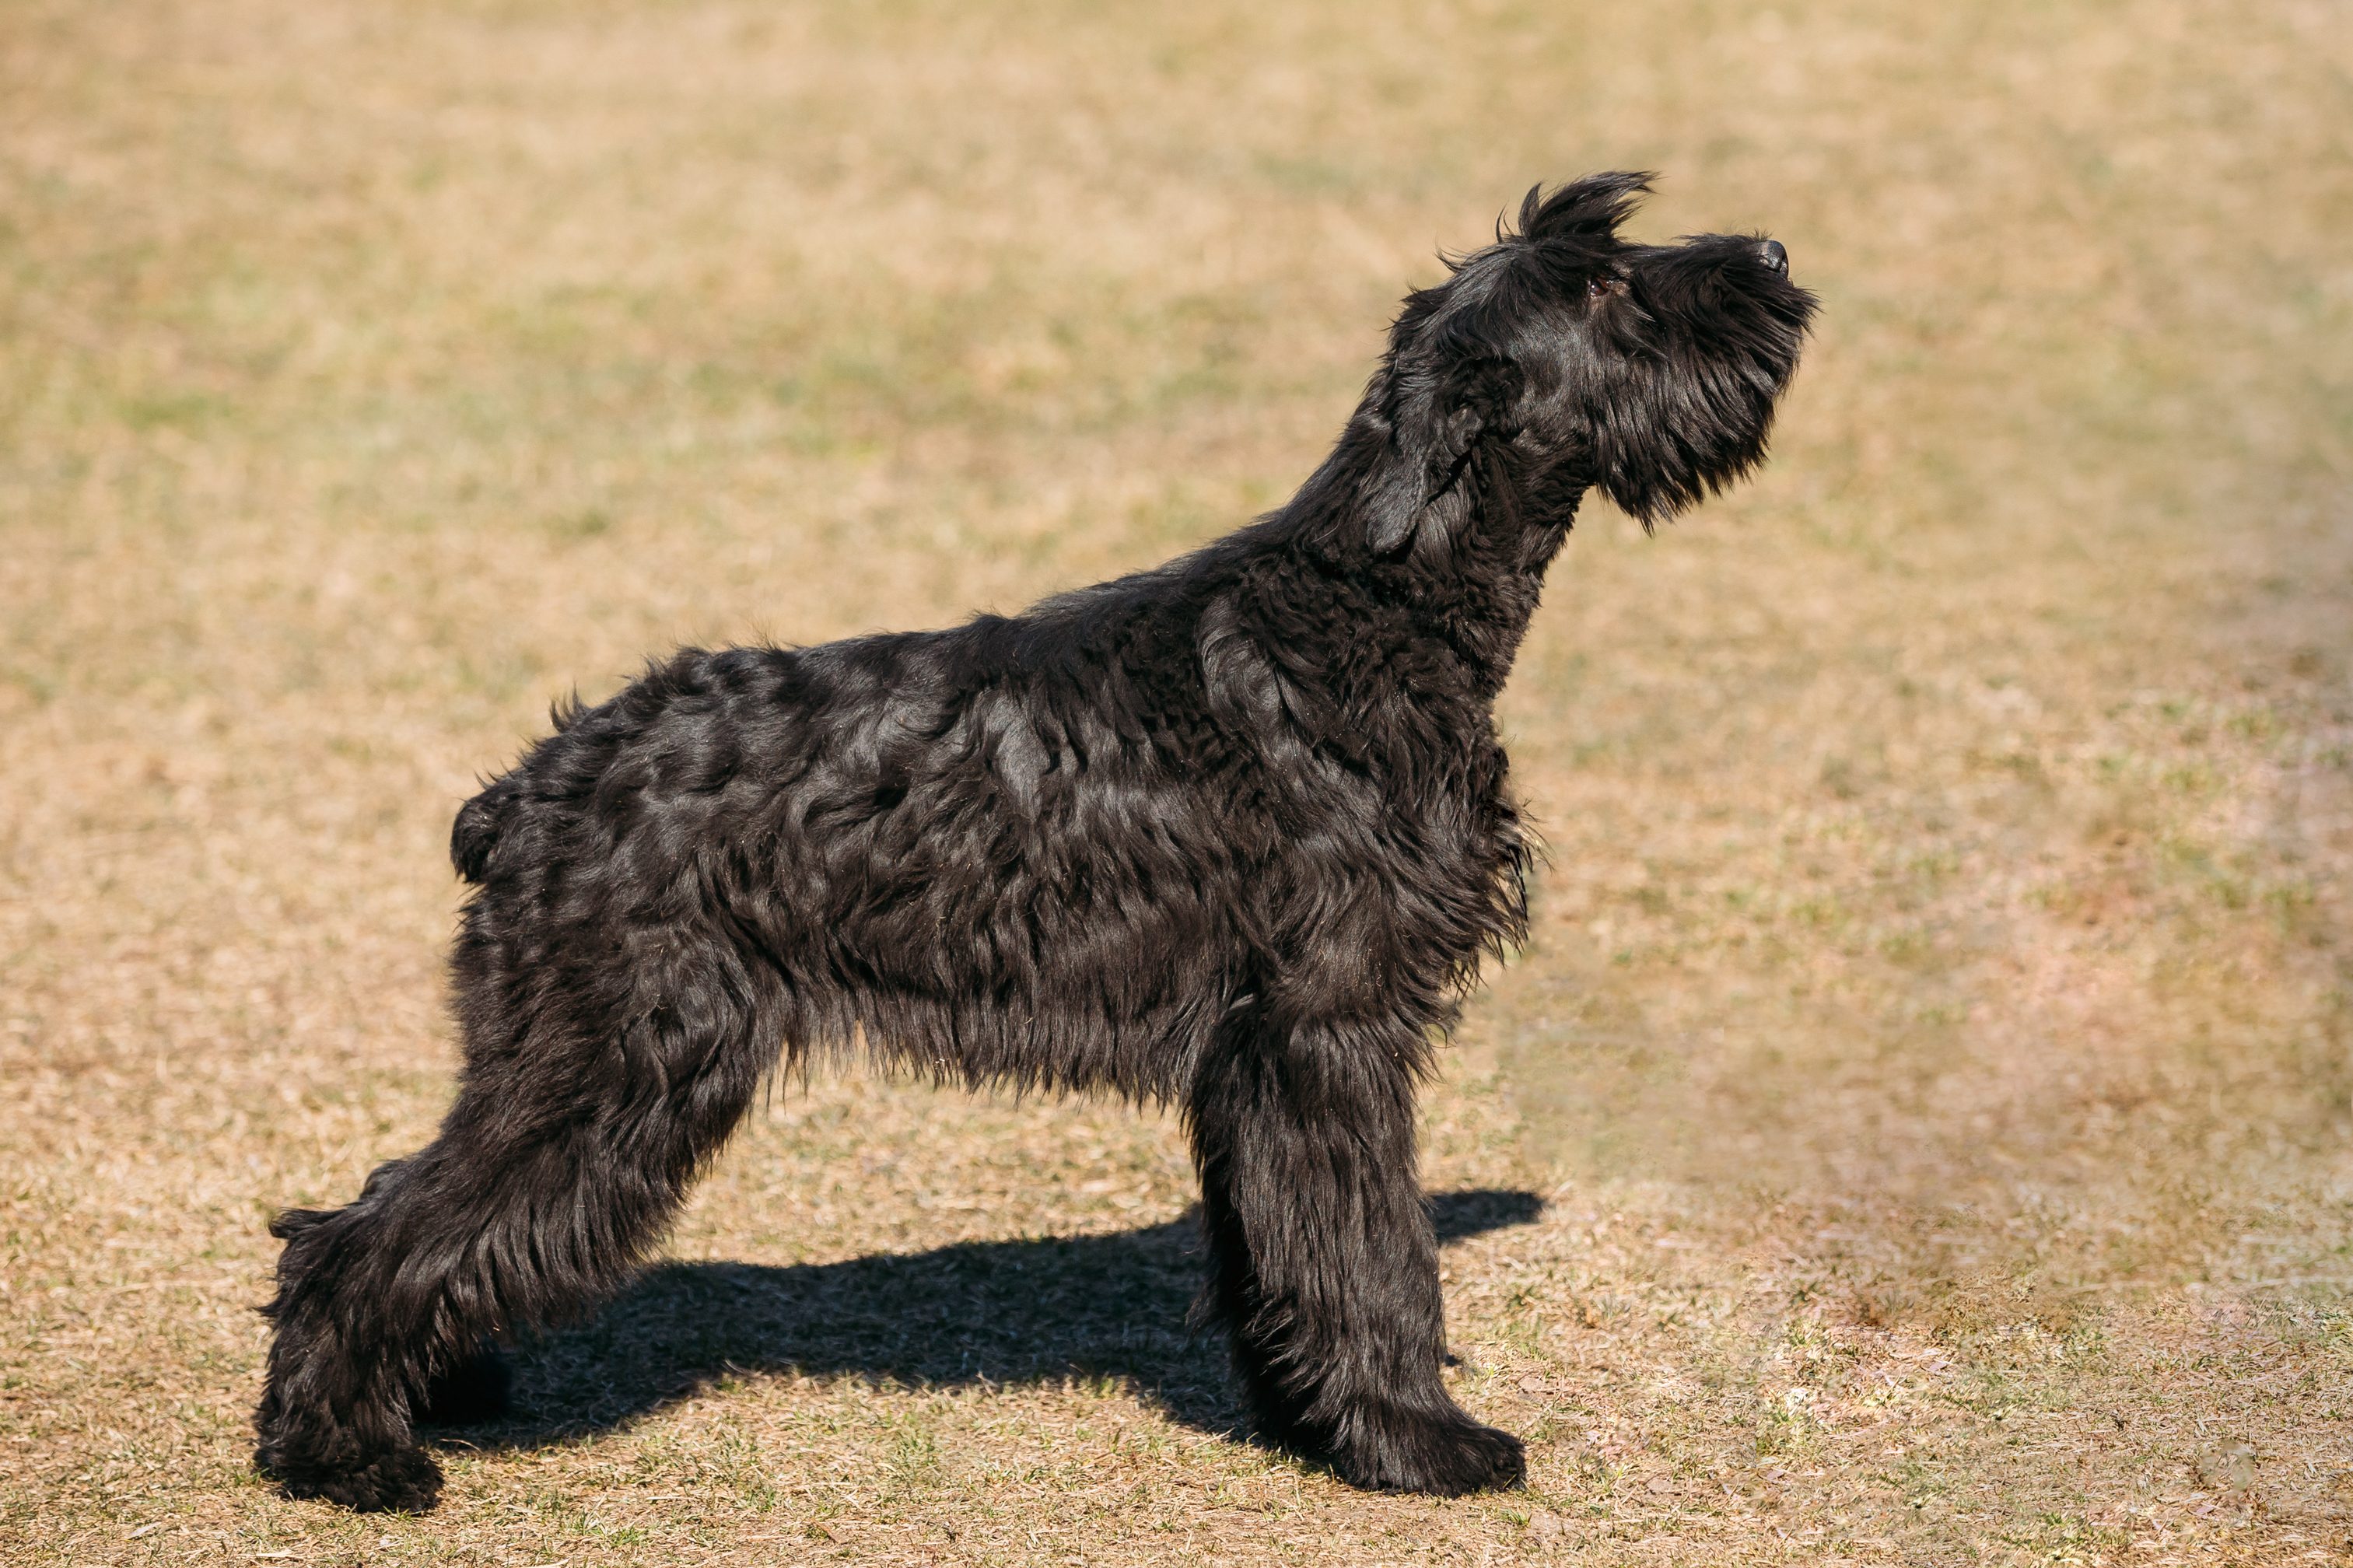 Giant schnauzer waiting at attention